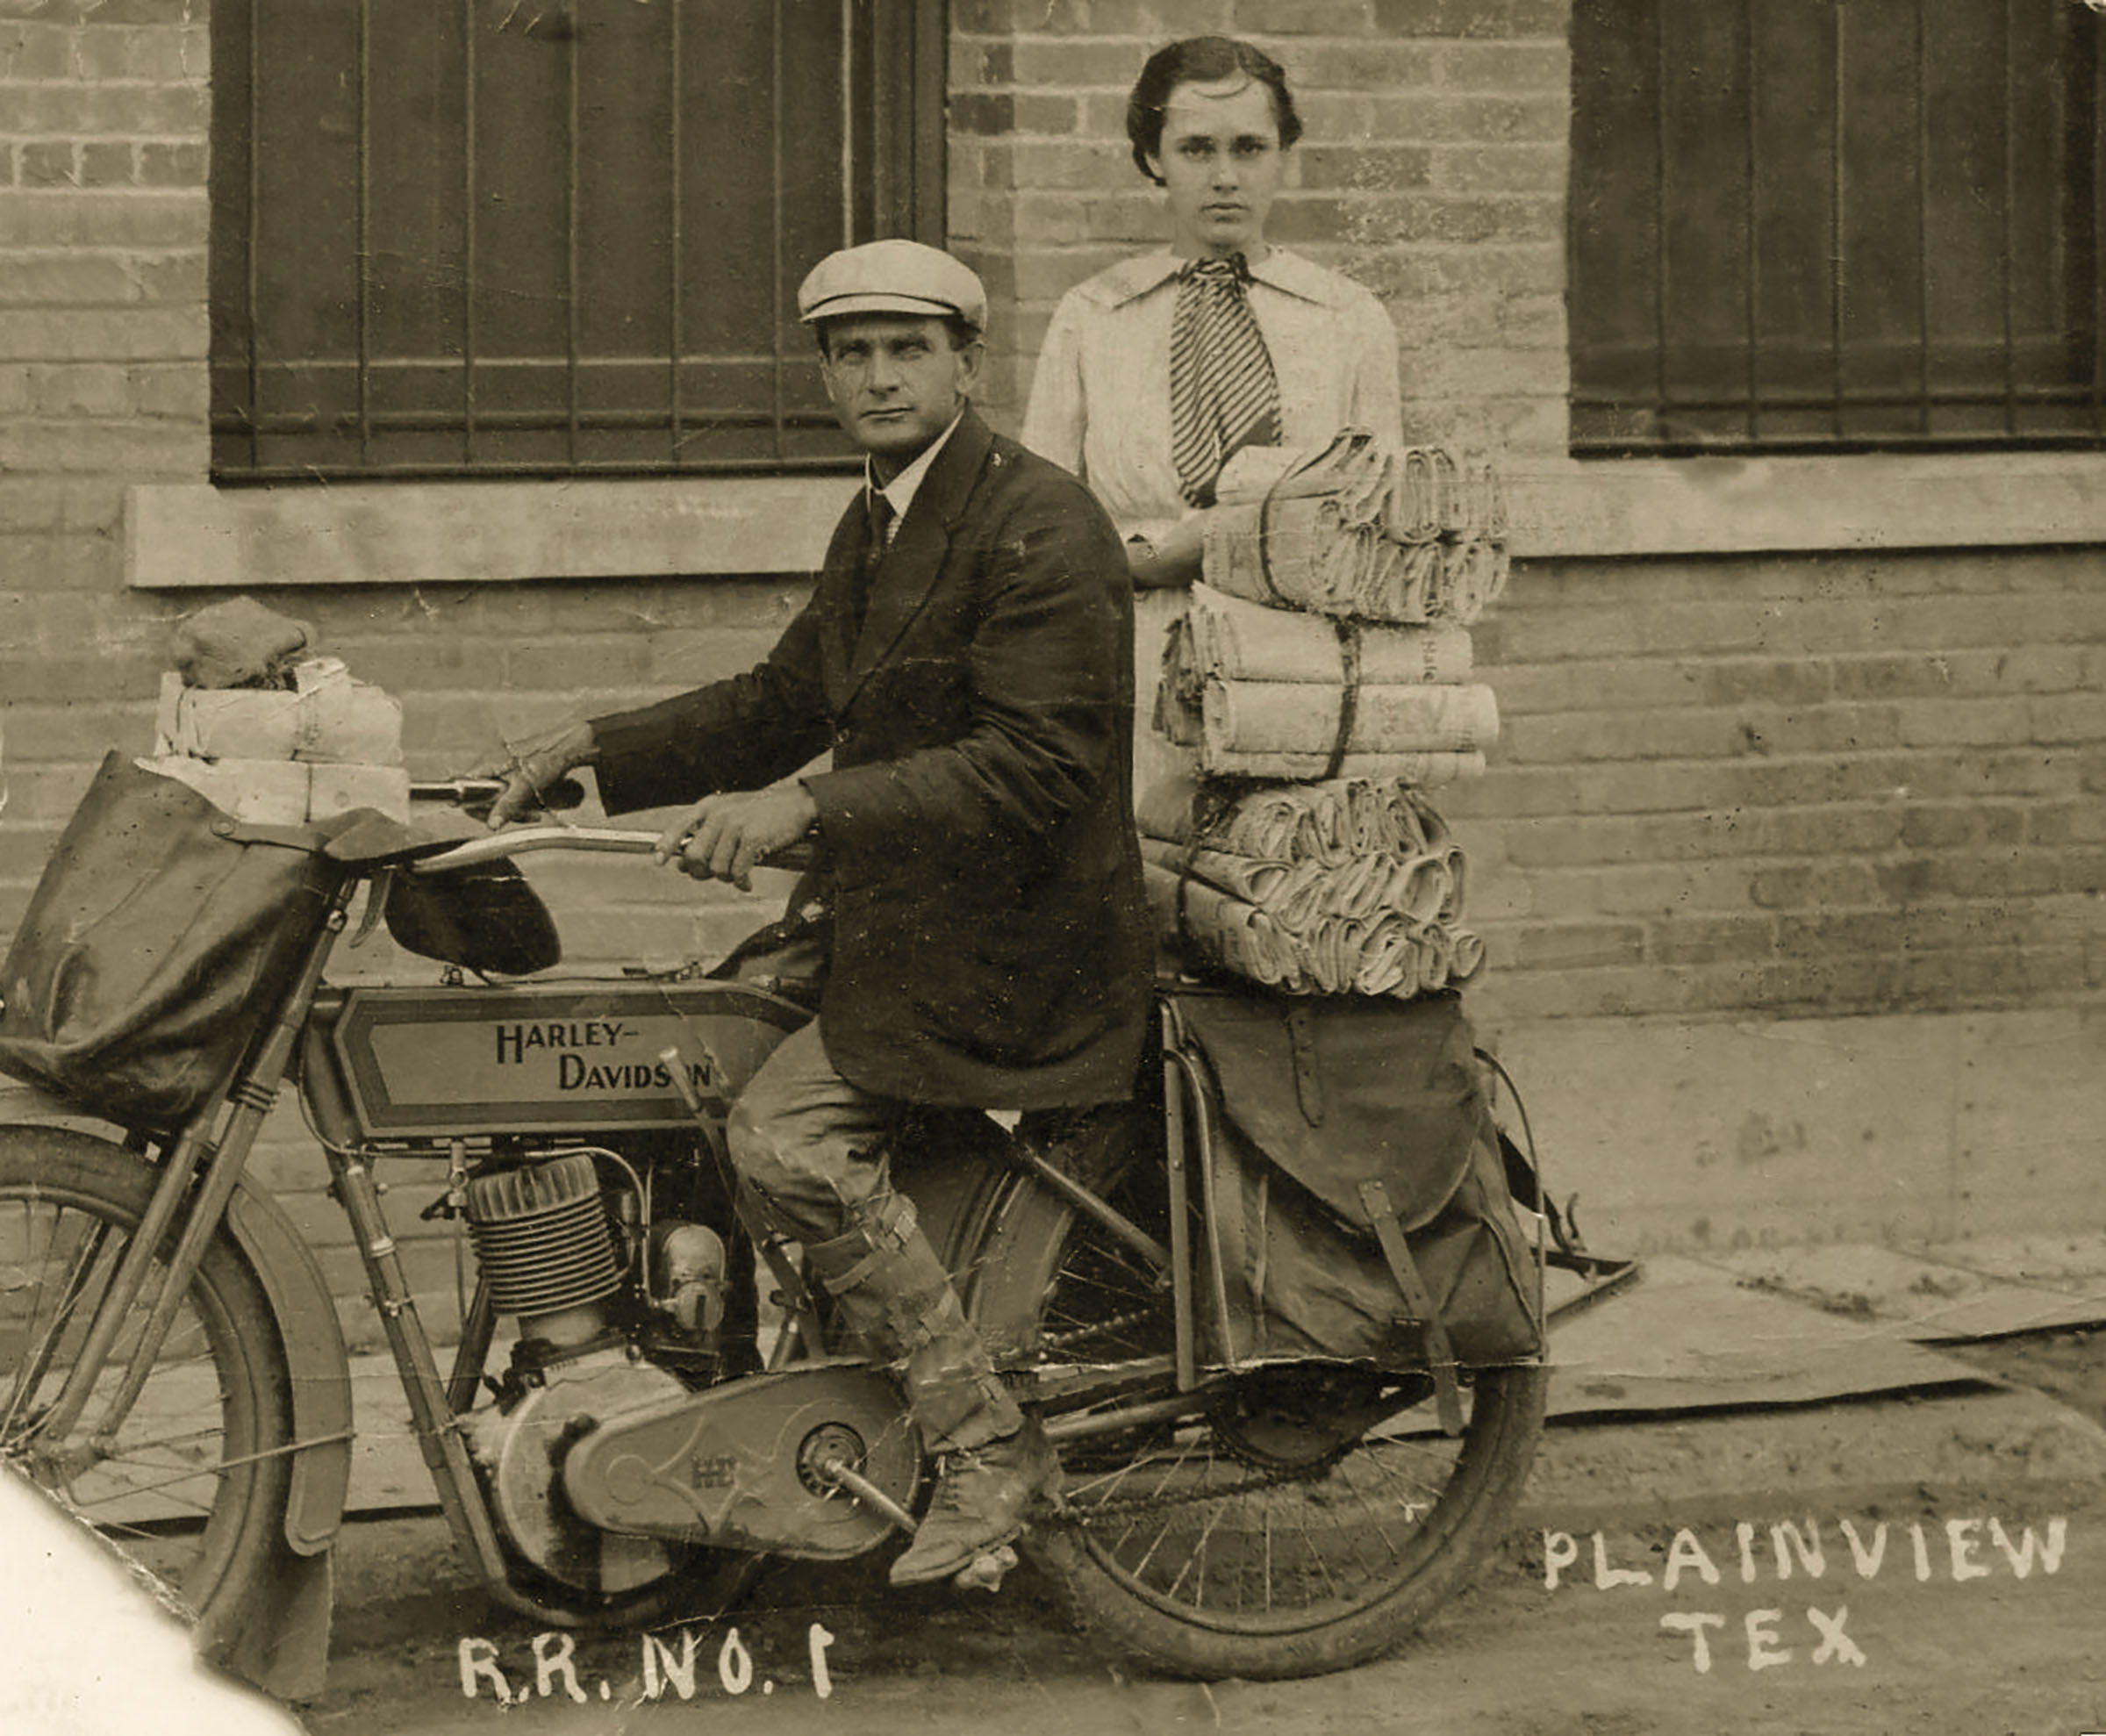 A sepia-tone photograph of a man on a motorcycle and a woman behind him. The motorcycle is loaded down with letters and packges.